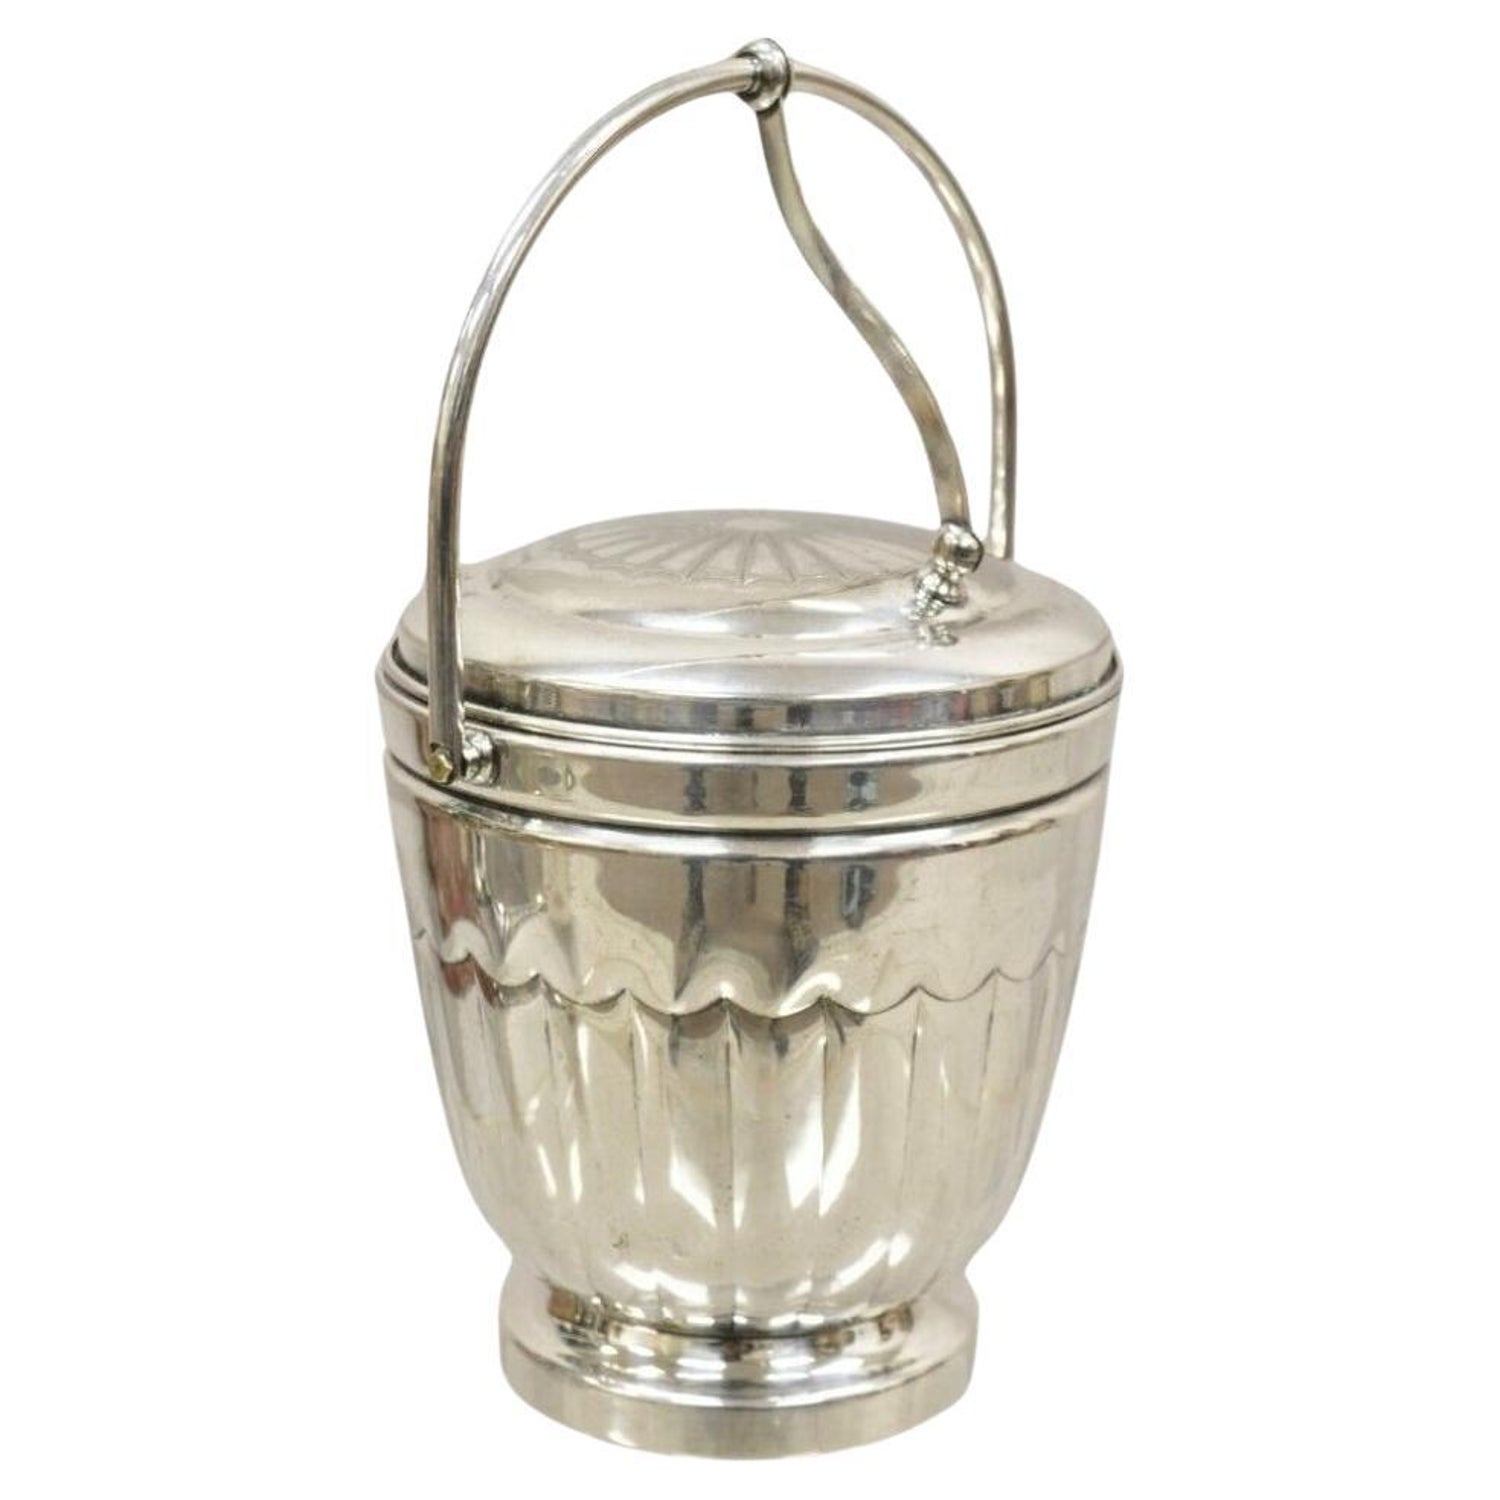 Sold at Auction: Crescent silver plate ice bucket with Thermos liner